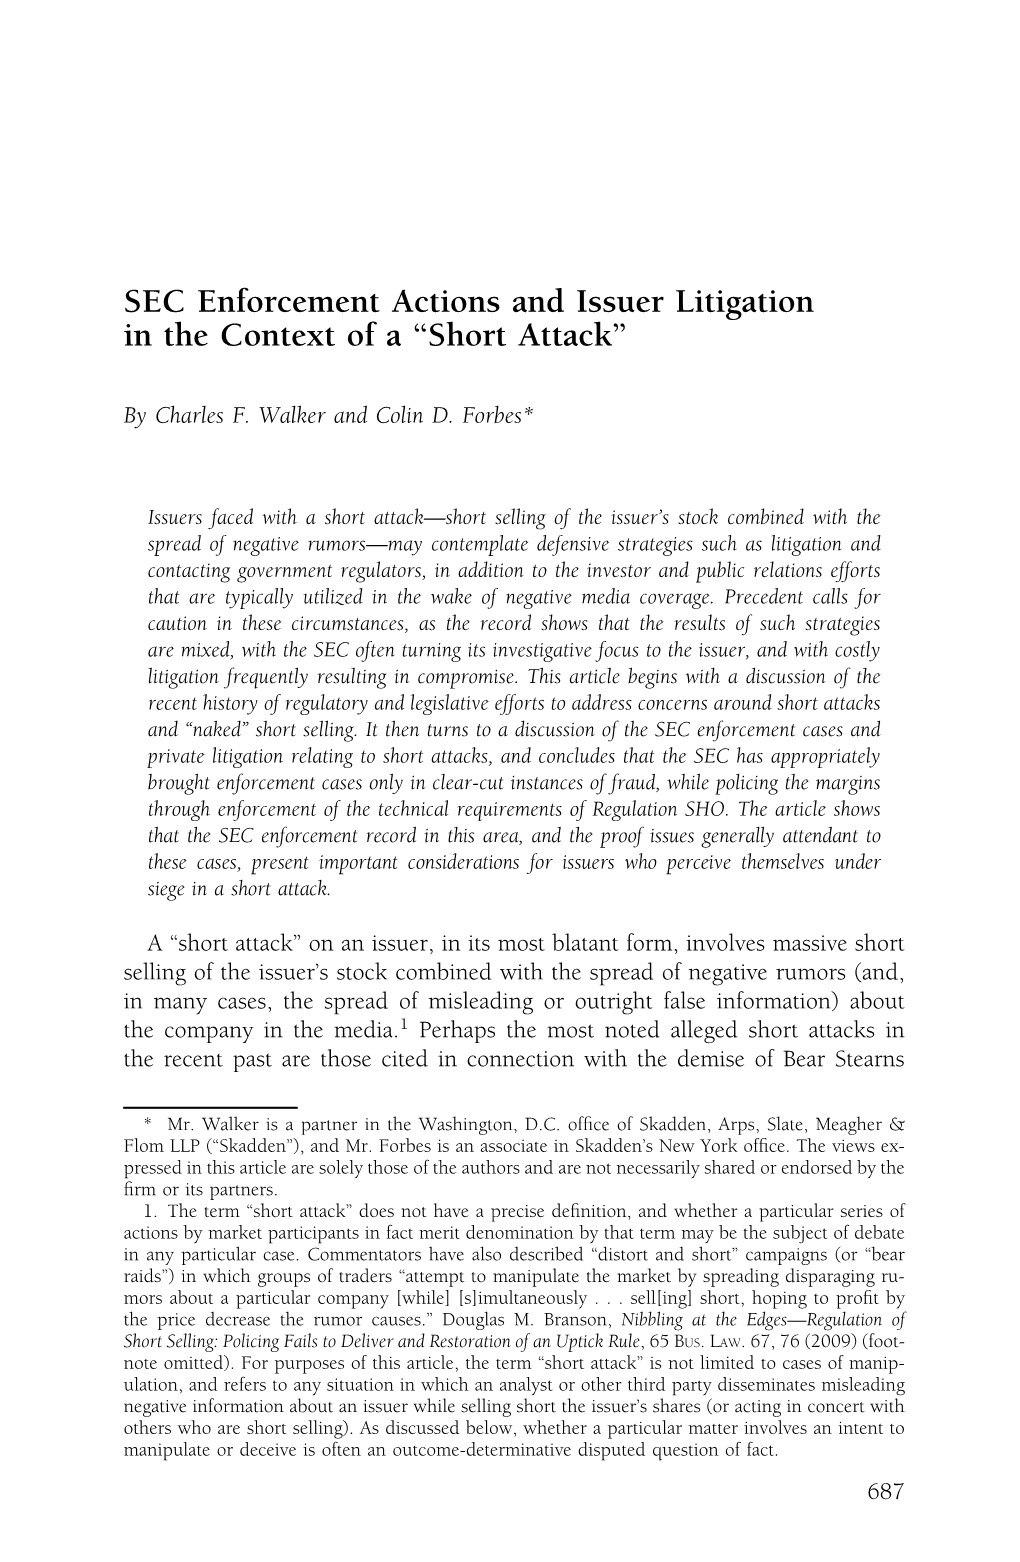 SEC Enforcement Actions and Issuer Litigation in the Context of a “Short Attack”